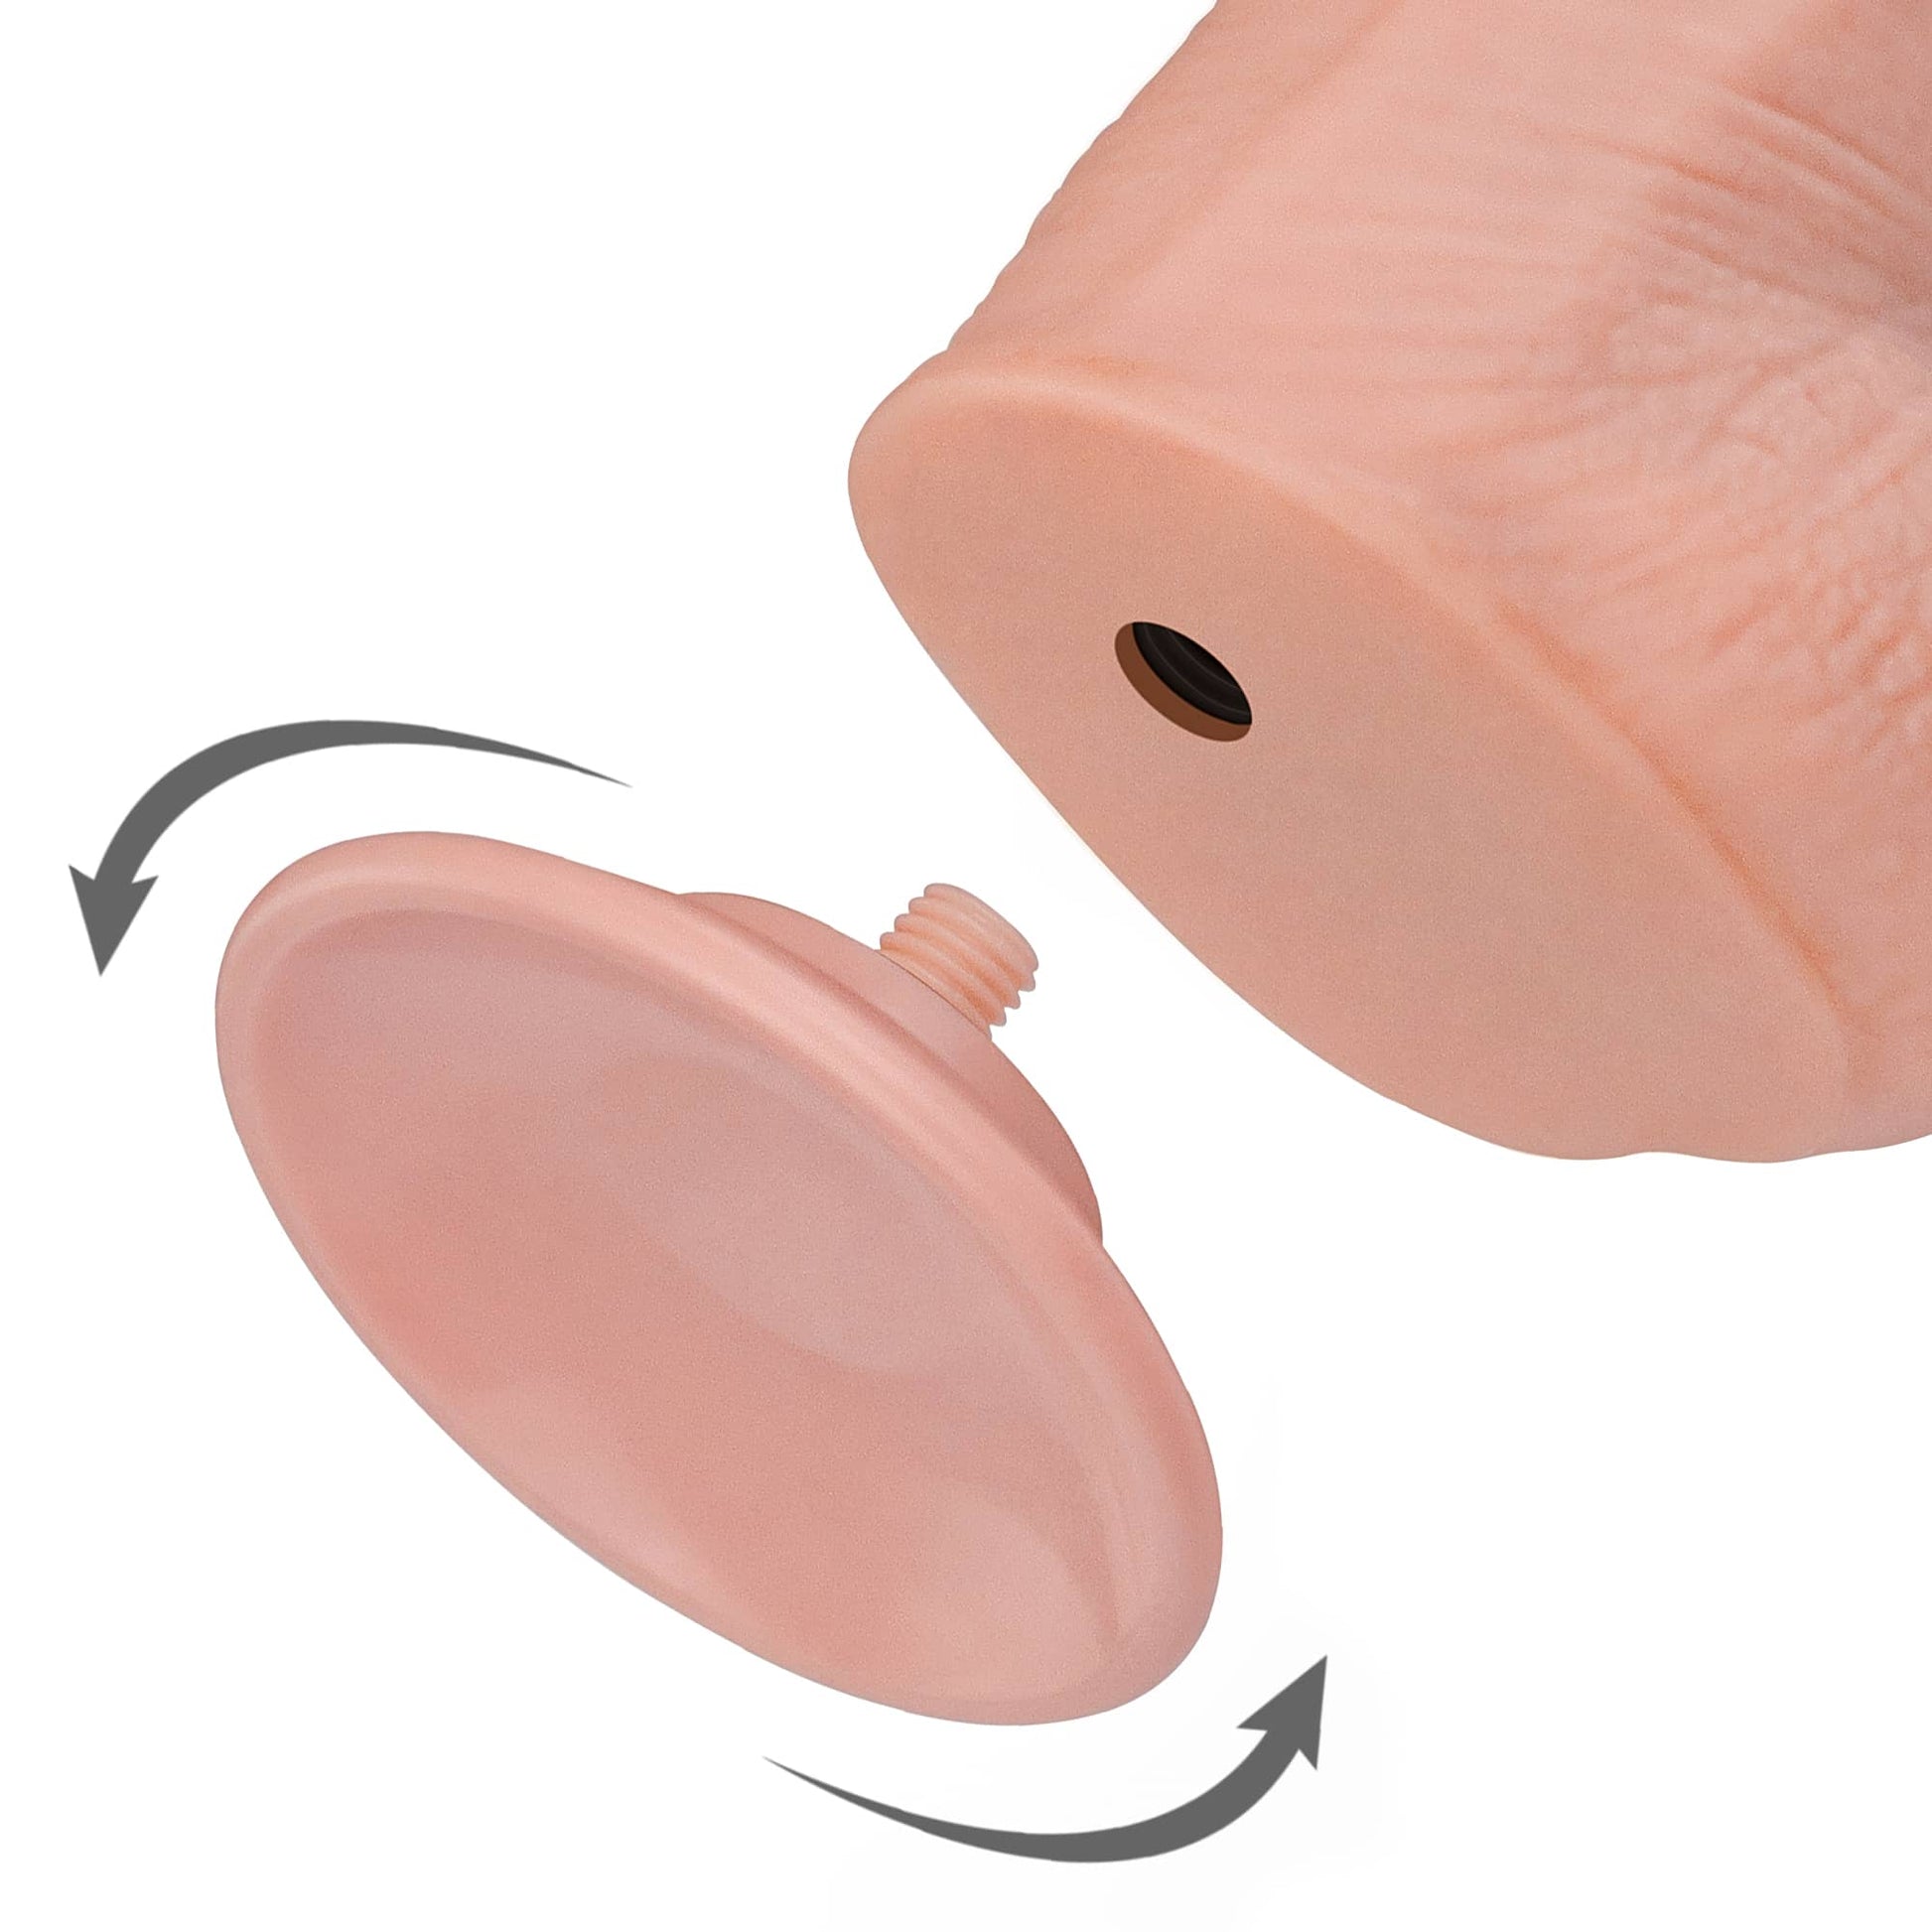 The removable suction cup of the 13.5 inches huge soft sliding skin dildo